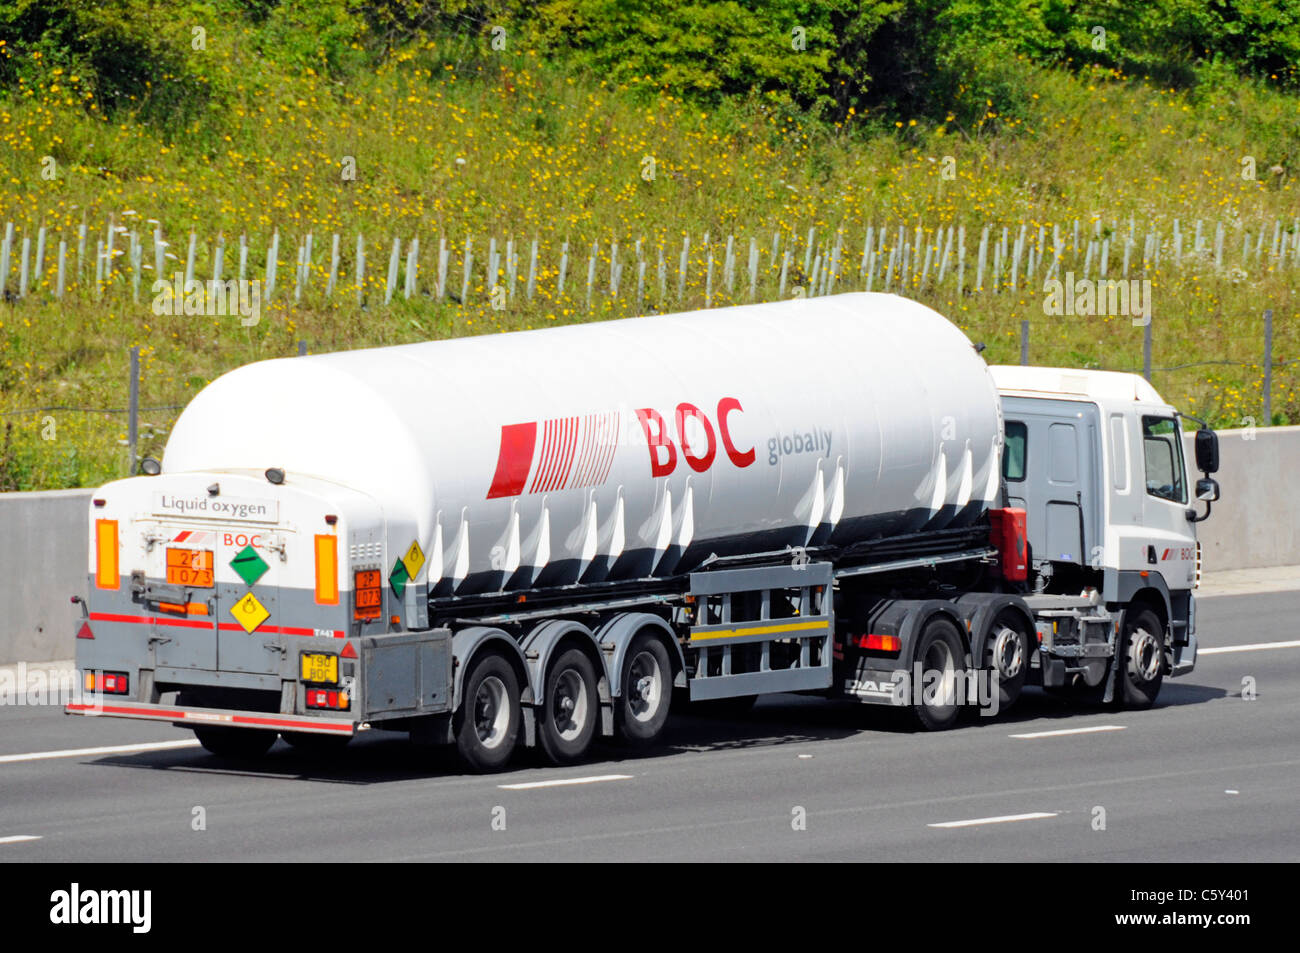 British Oxygen Company BOC liquid gas material in articulated tanker trailer and hgv lorry truck driving along motorway England UK Stock Photo